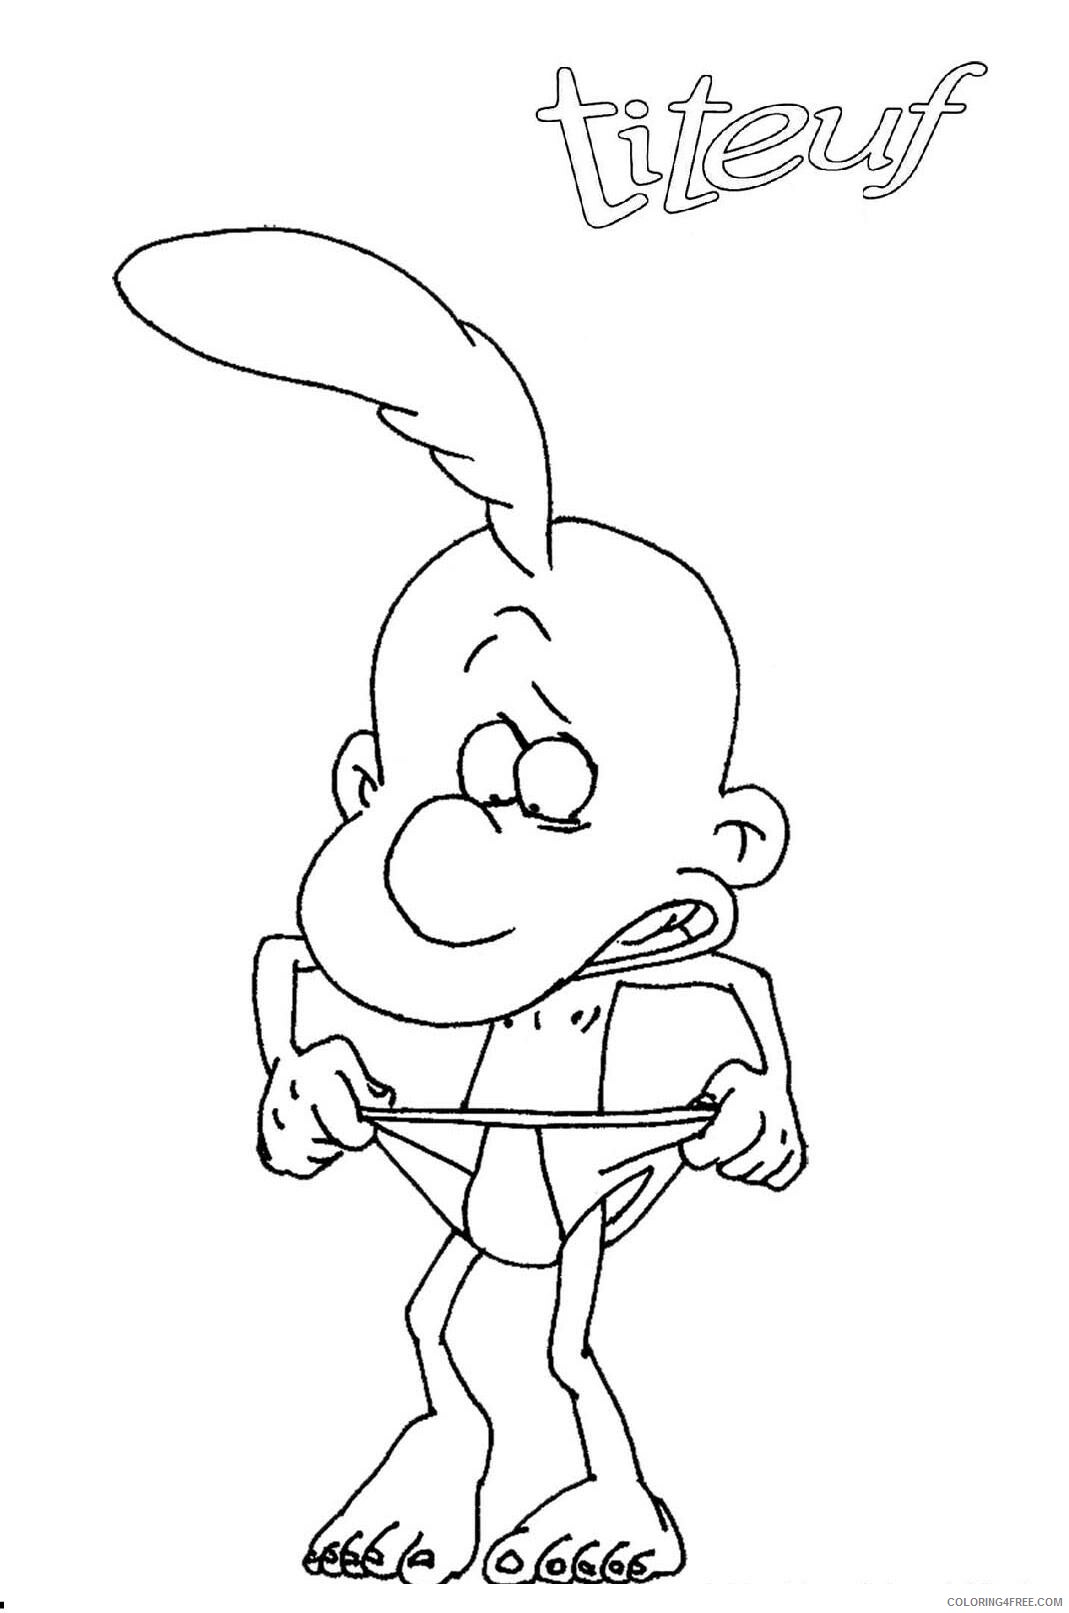 Titeuf Coloring Pages TV Film titeuf_cl_30 Printable 2020 10039 Coloring4free